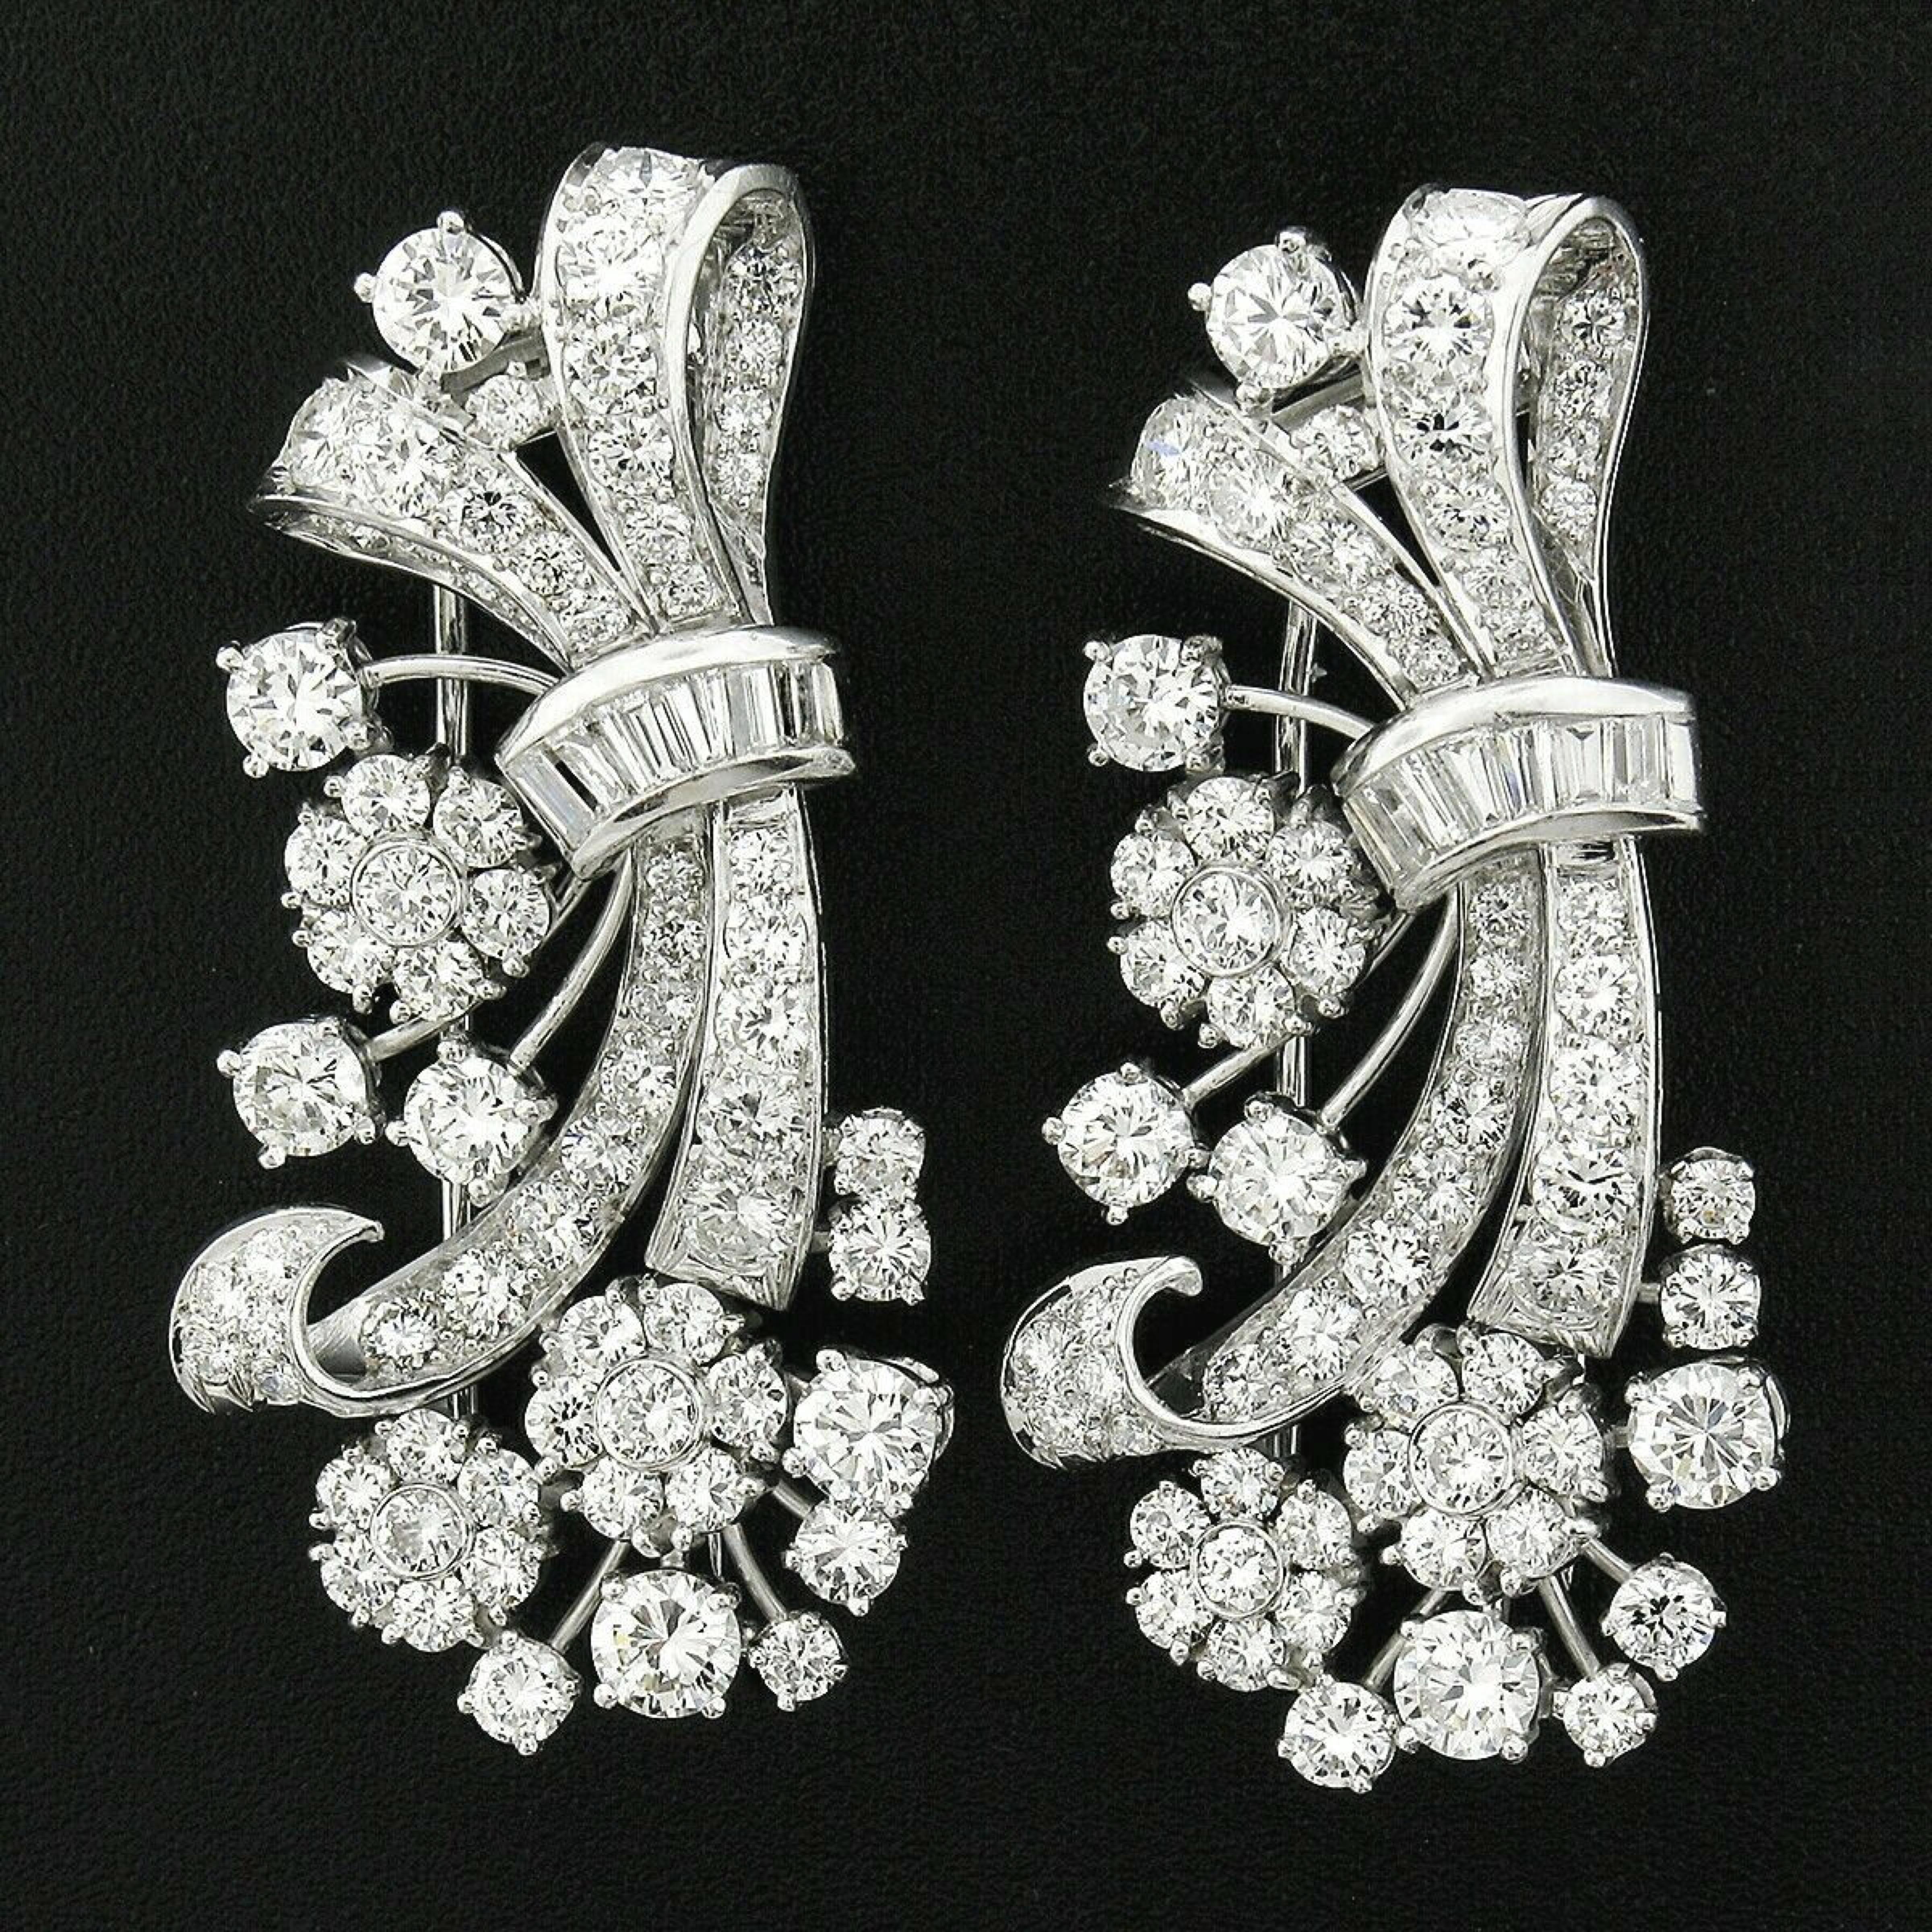 Here we have a pair of two truly breathtaking and matching vintage brooch/clips that are crafted from solid platinum and completely drenched with very fine quality diamonds that together total approximately 11.50 carats in weight. It features